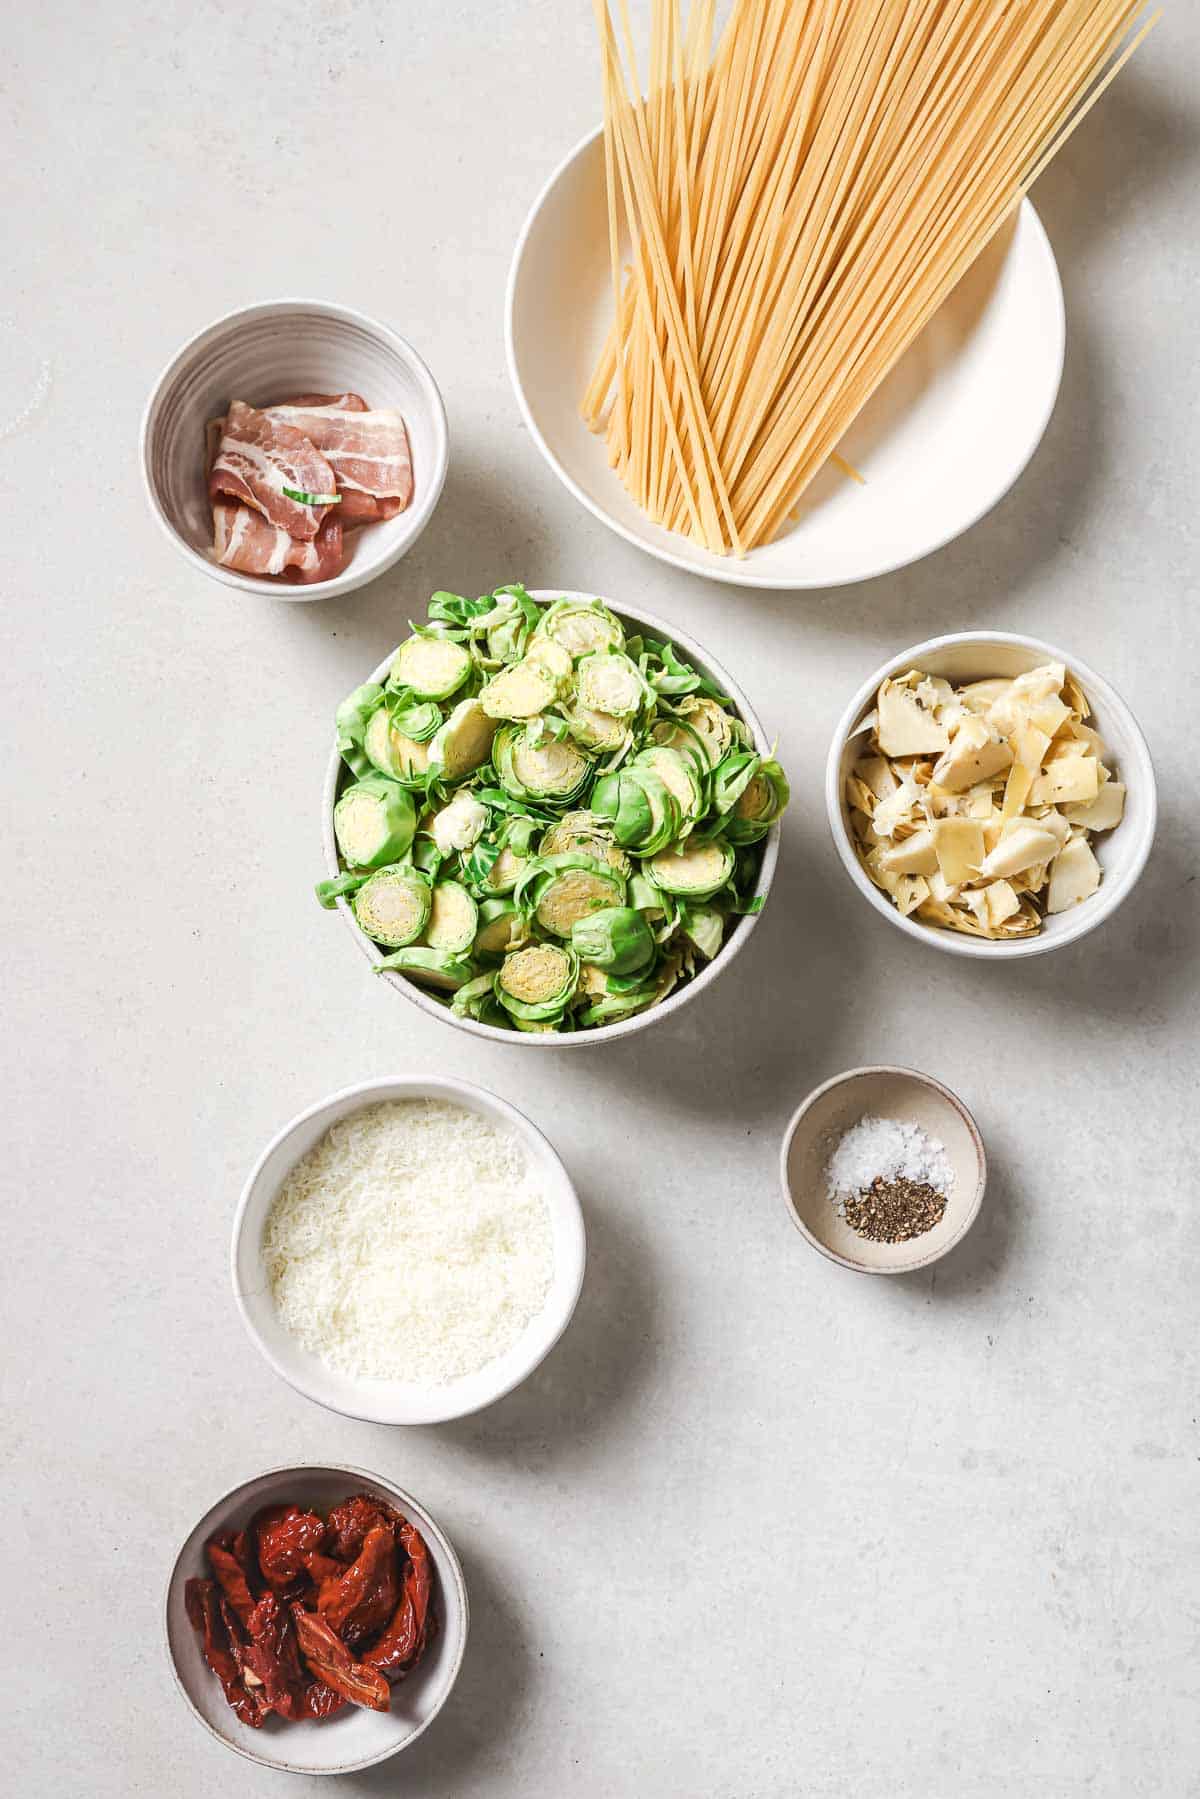 Ingredients for brussels sprouts pasta in bowls on a white surface.